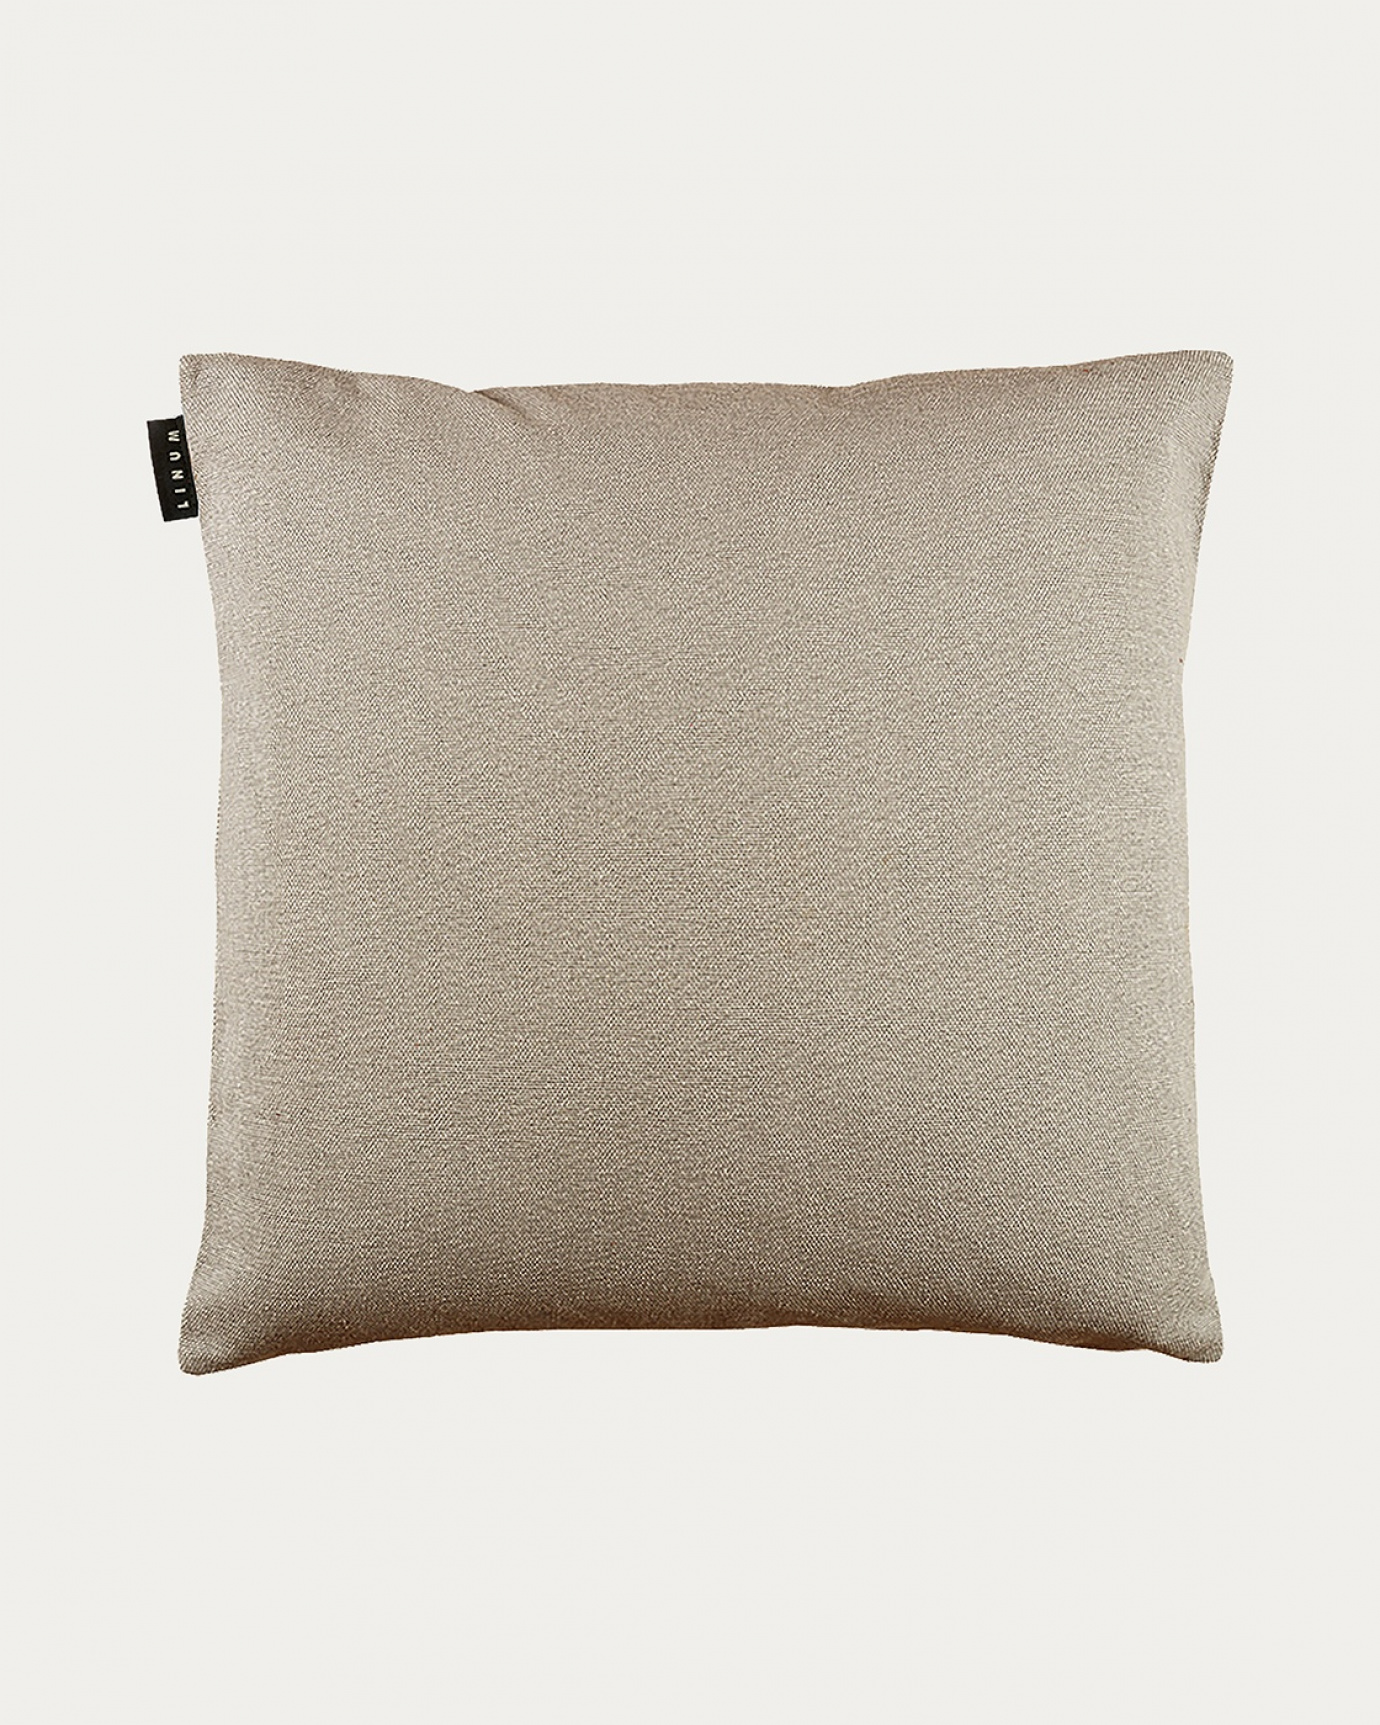 Product image light bear brown PEPPER cushion cover made of soft cotton from LINUM DESIGN. Easy to wash and durable for generations. Size 50x50 cm.